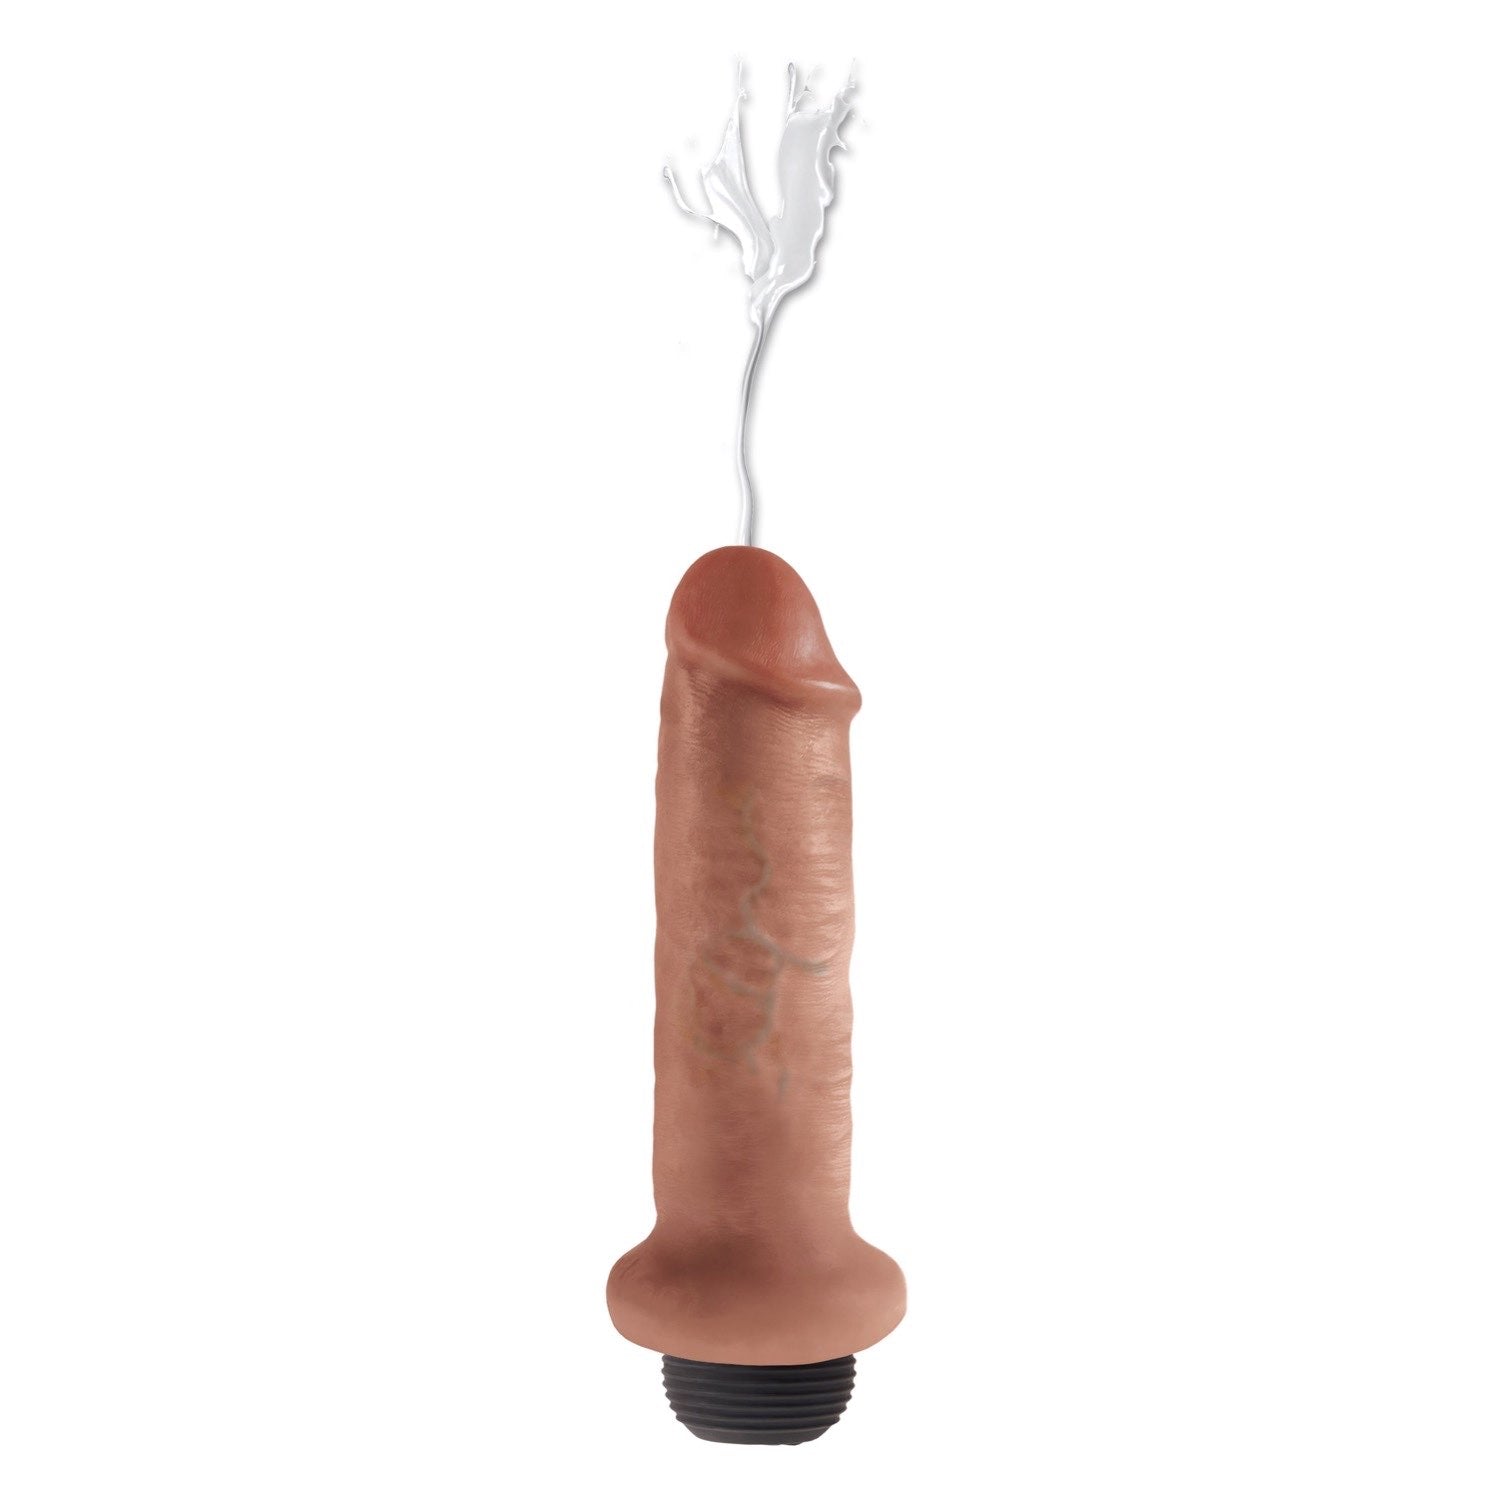 King Cock 6&quot; Squirting Cock - Tan 15.2 cm Squirting Dong by Pipedream